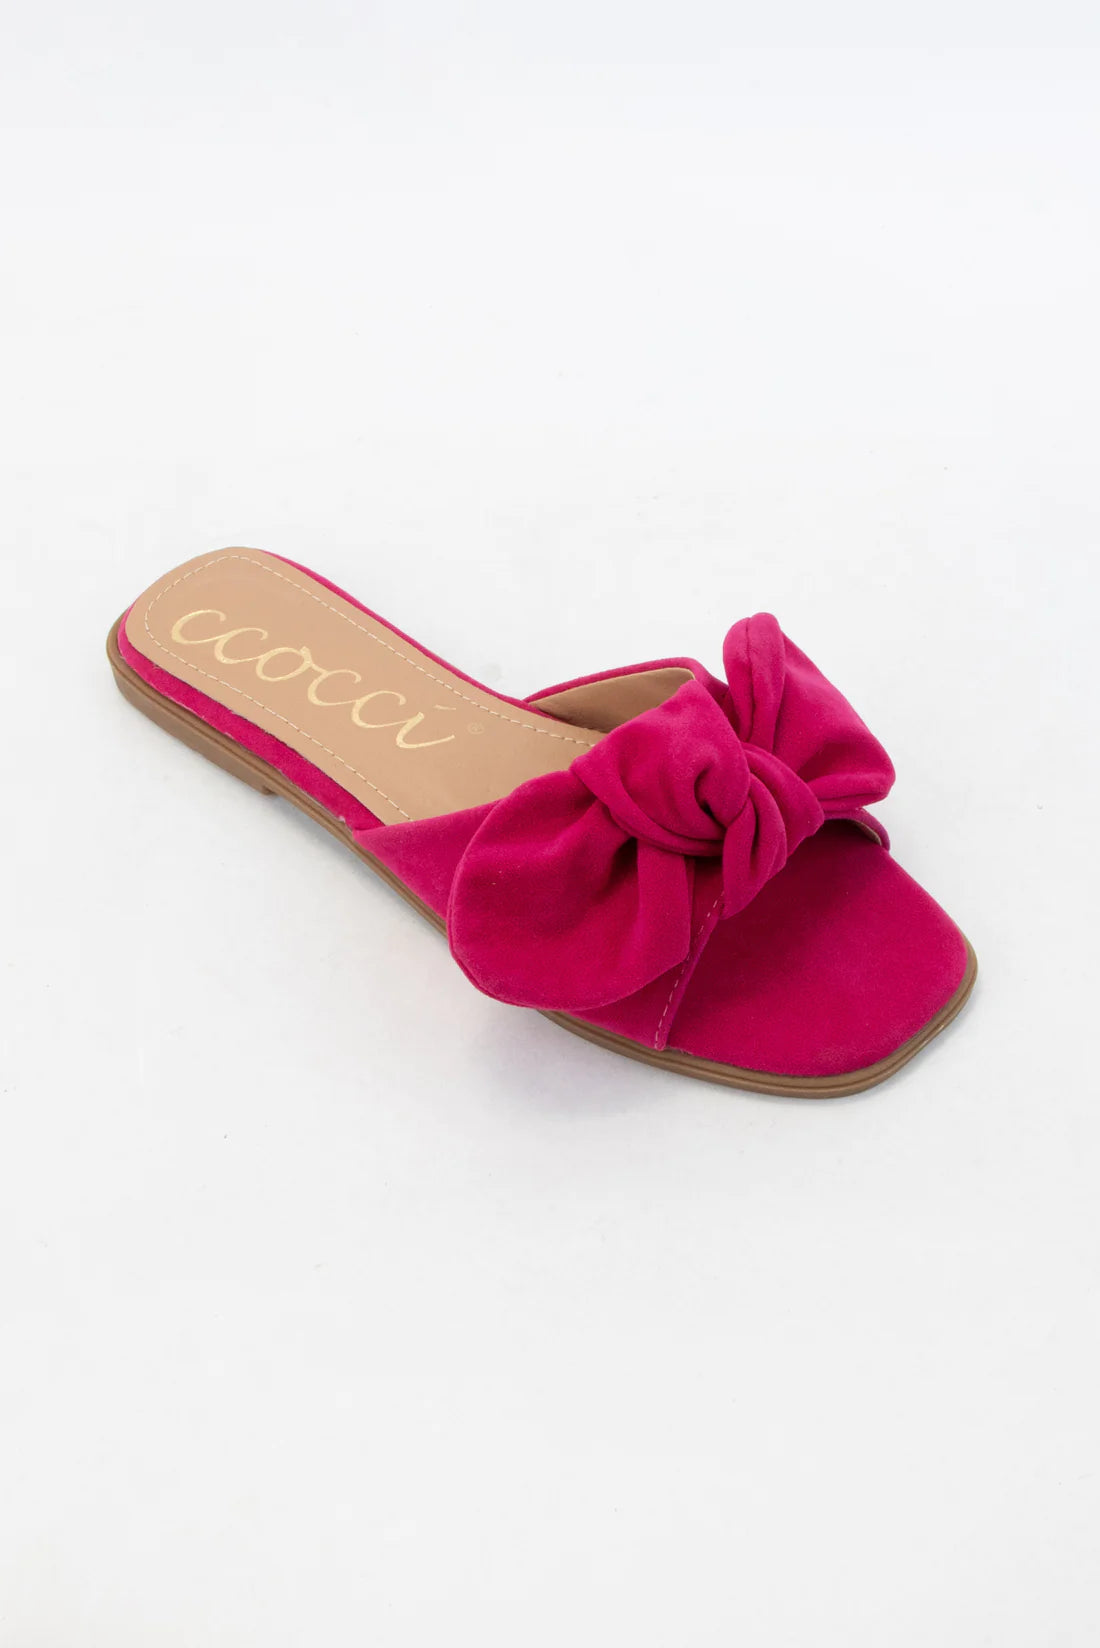 The Lawrence Slide in Fuchsia